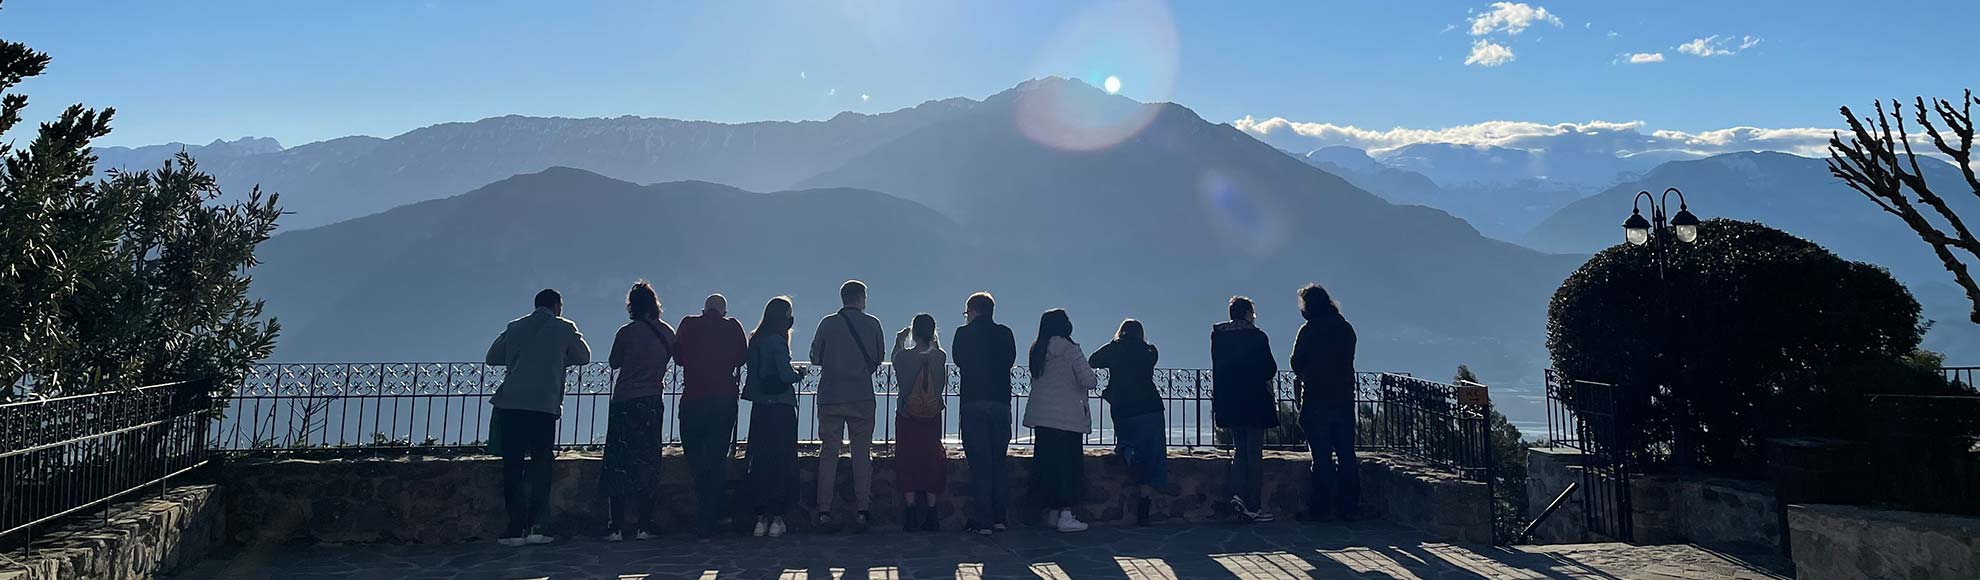 Several people standing near a railing with their backs to the camera. There is a beautiful mountain range in the background, with clouds floating behind them.